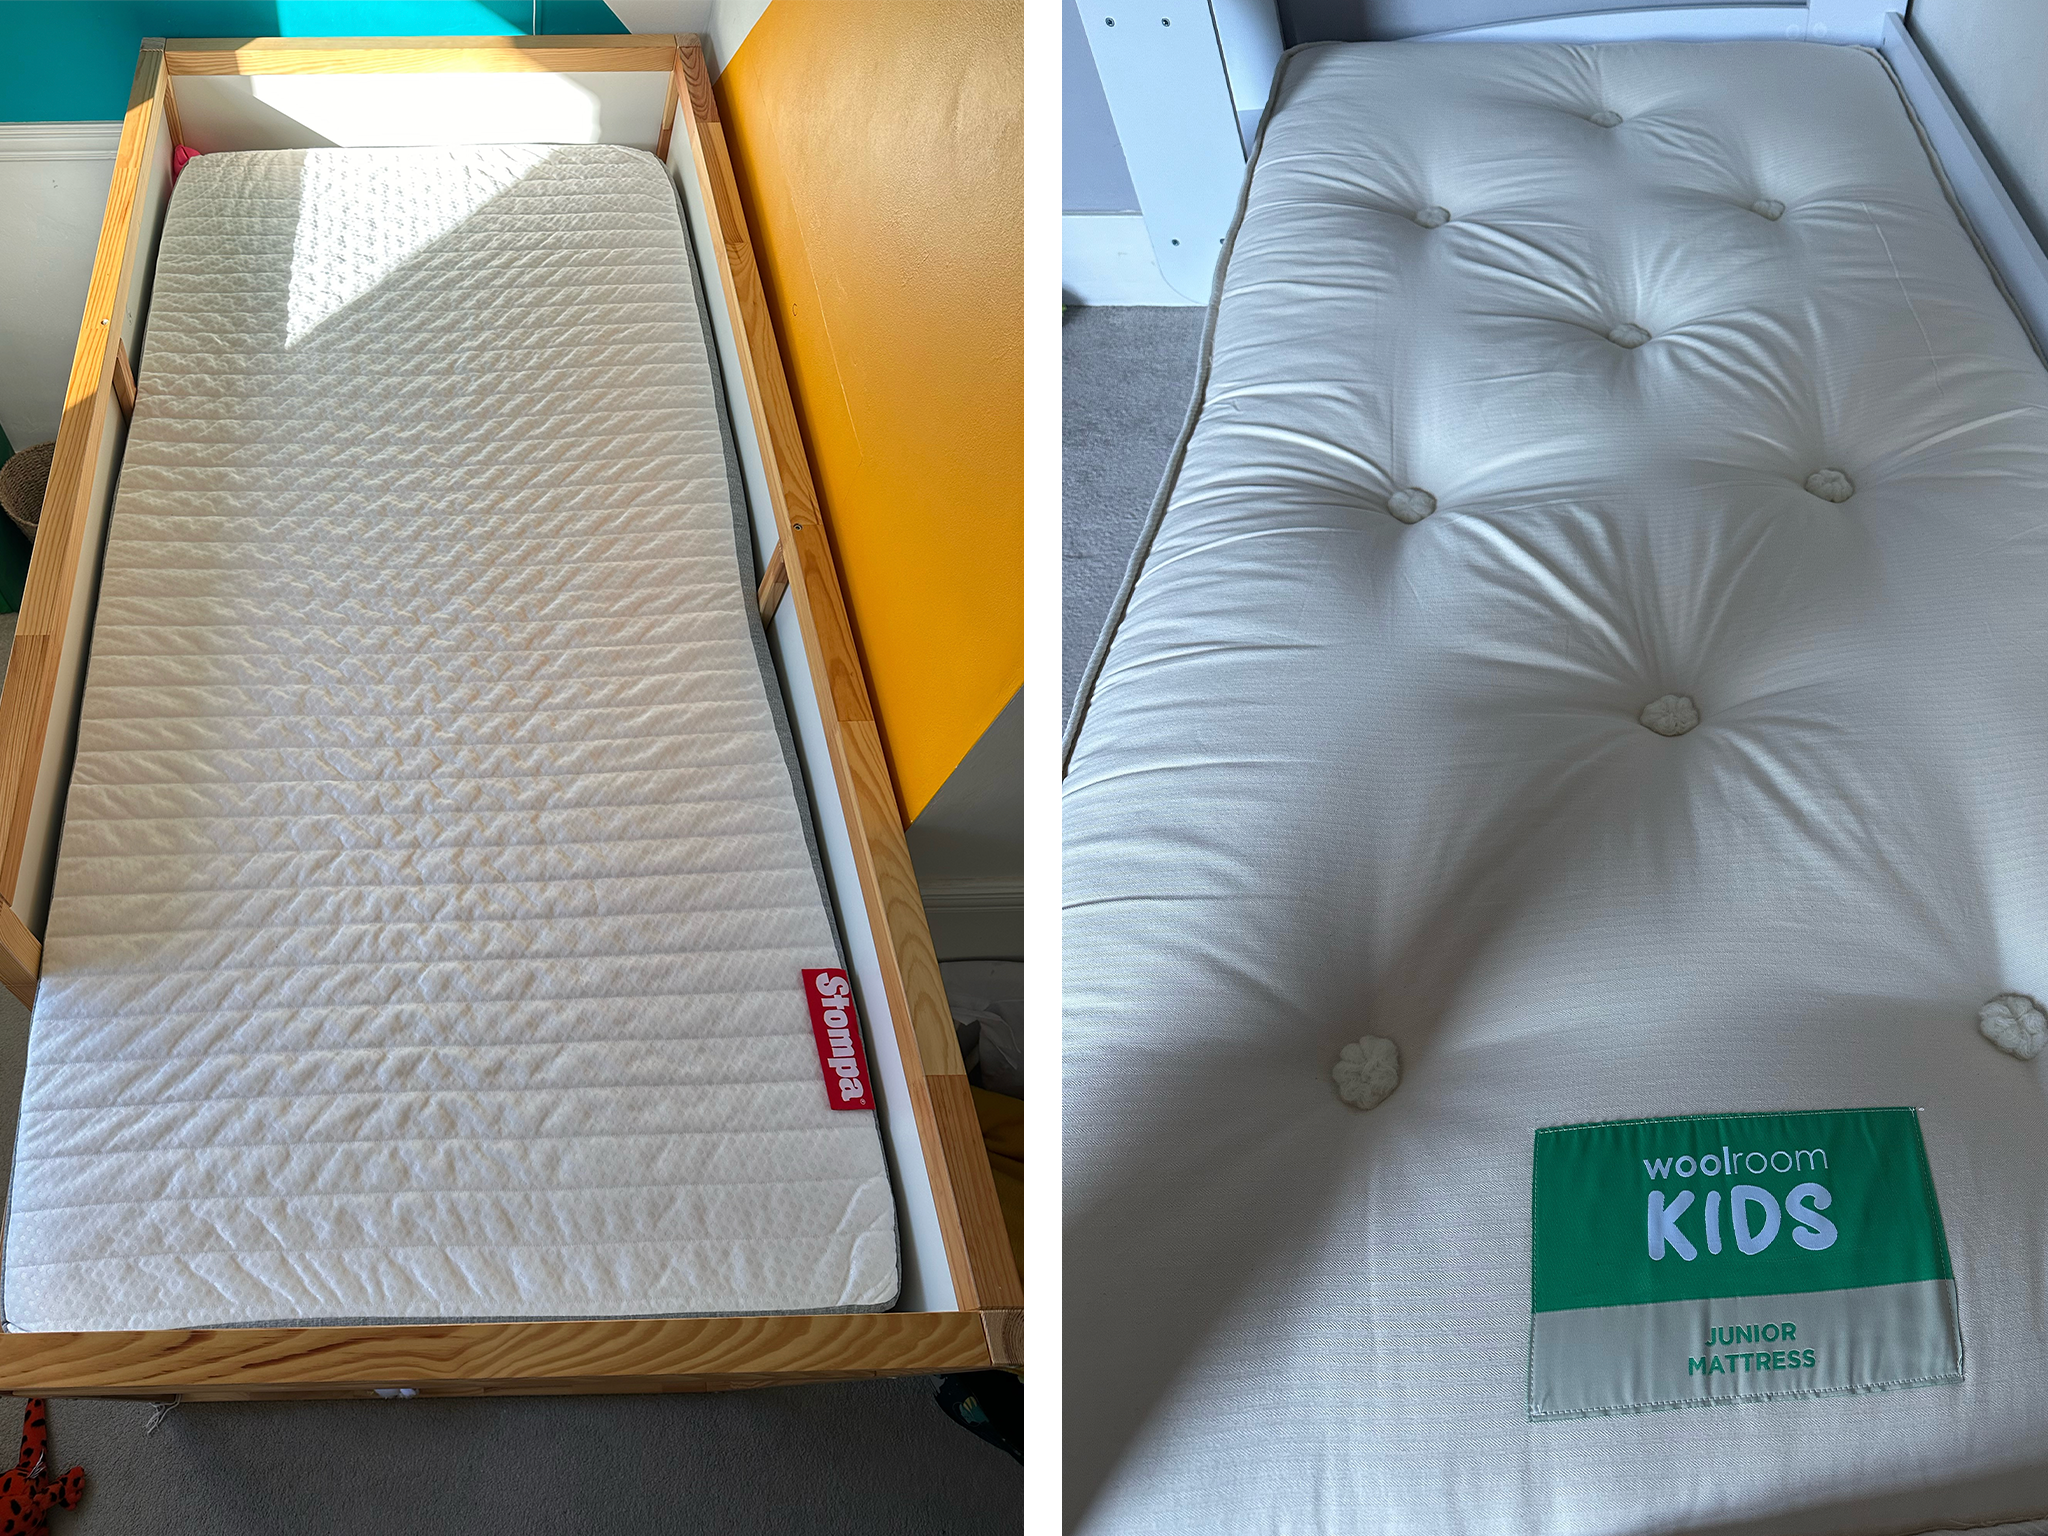 Two of the best mattresses for children that we tried and tested